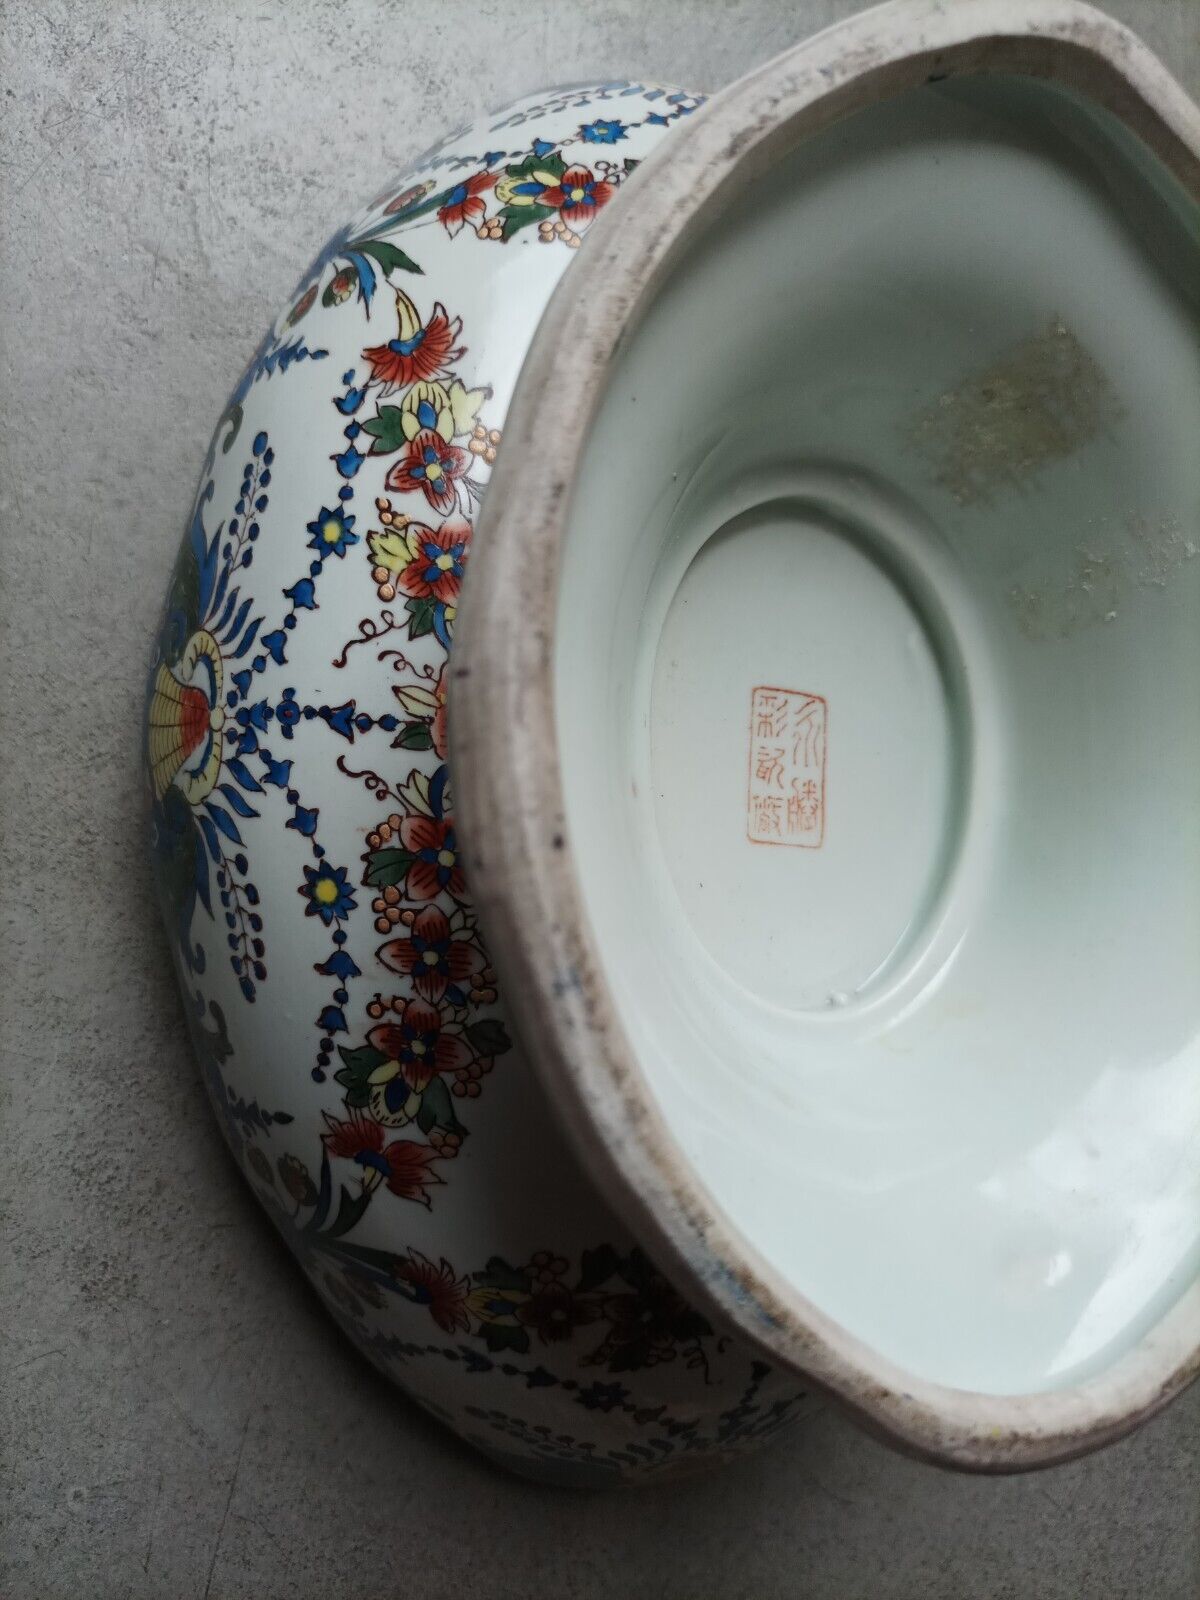 JAPON CHINE porcelaine chinese PORCELAIN JAPAN CHINA CHINOIS SIGNÉ